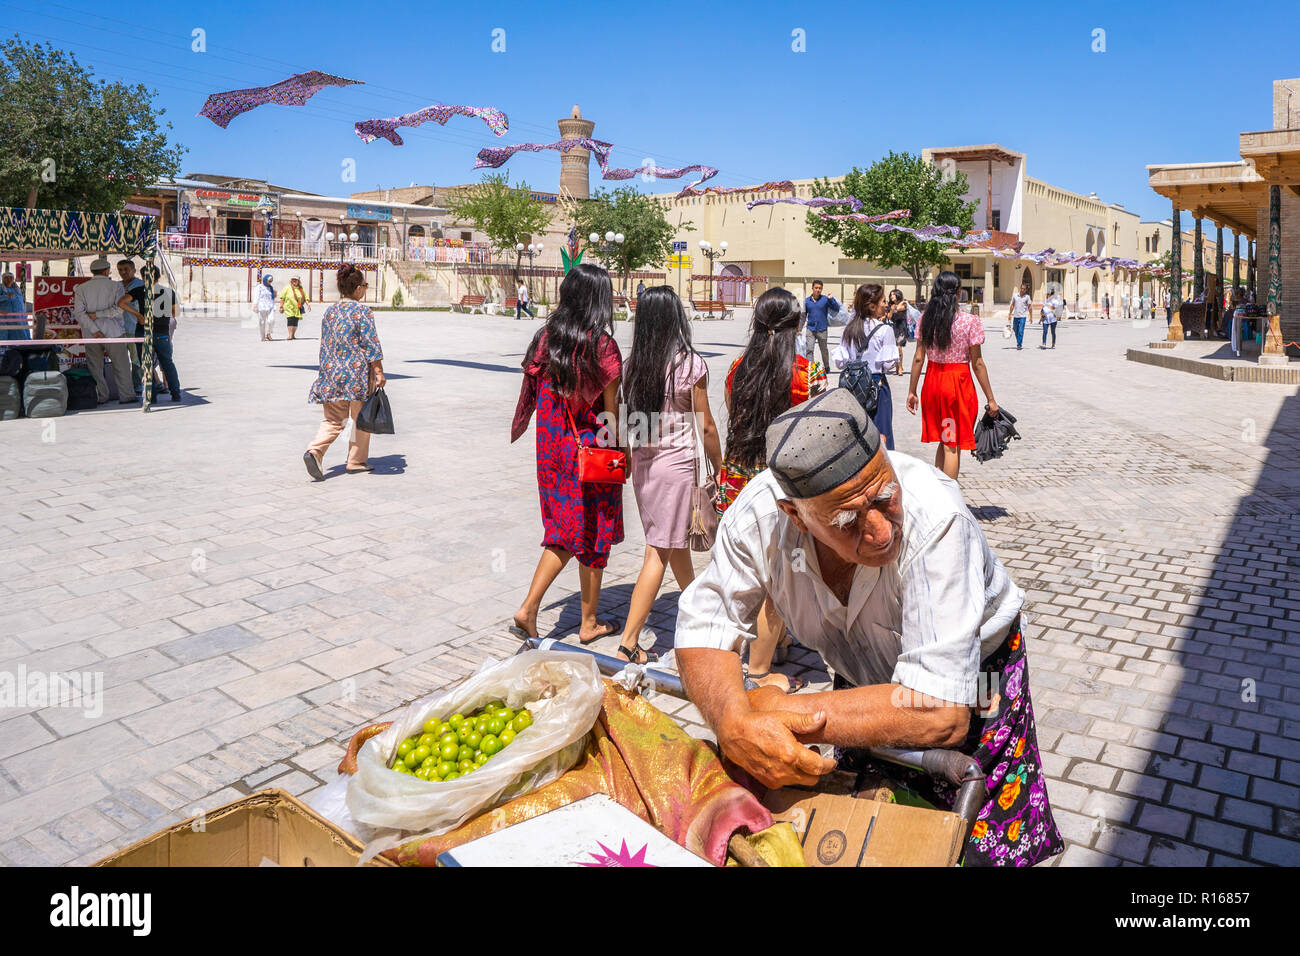 An old man selling foods and groceries on a chariot in the streets of Bukhara, Uzbekistan Stock Photo